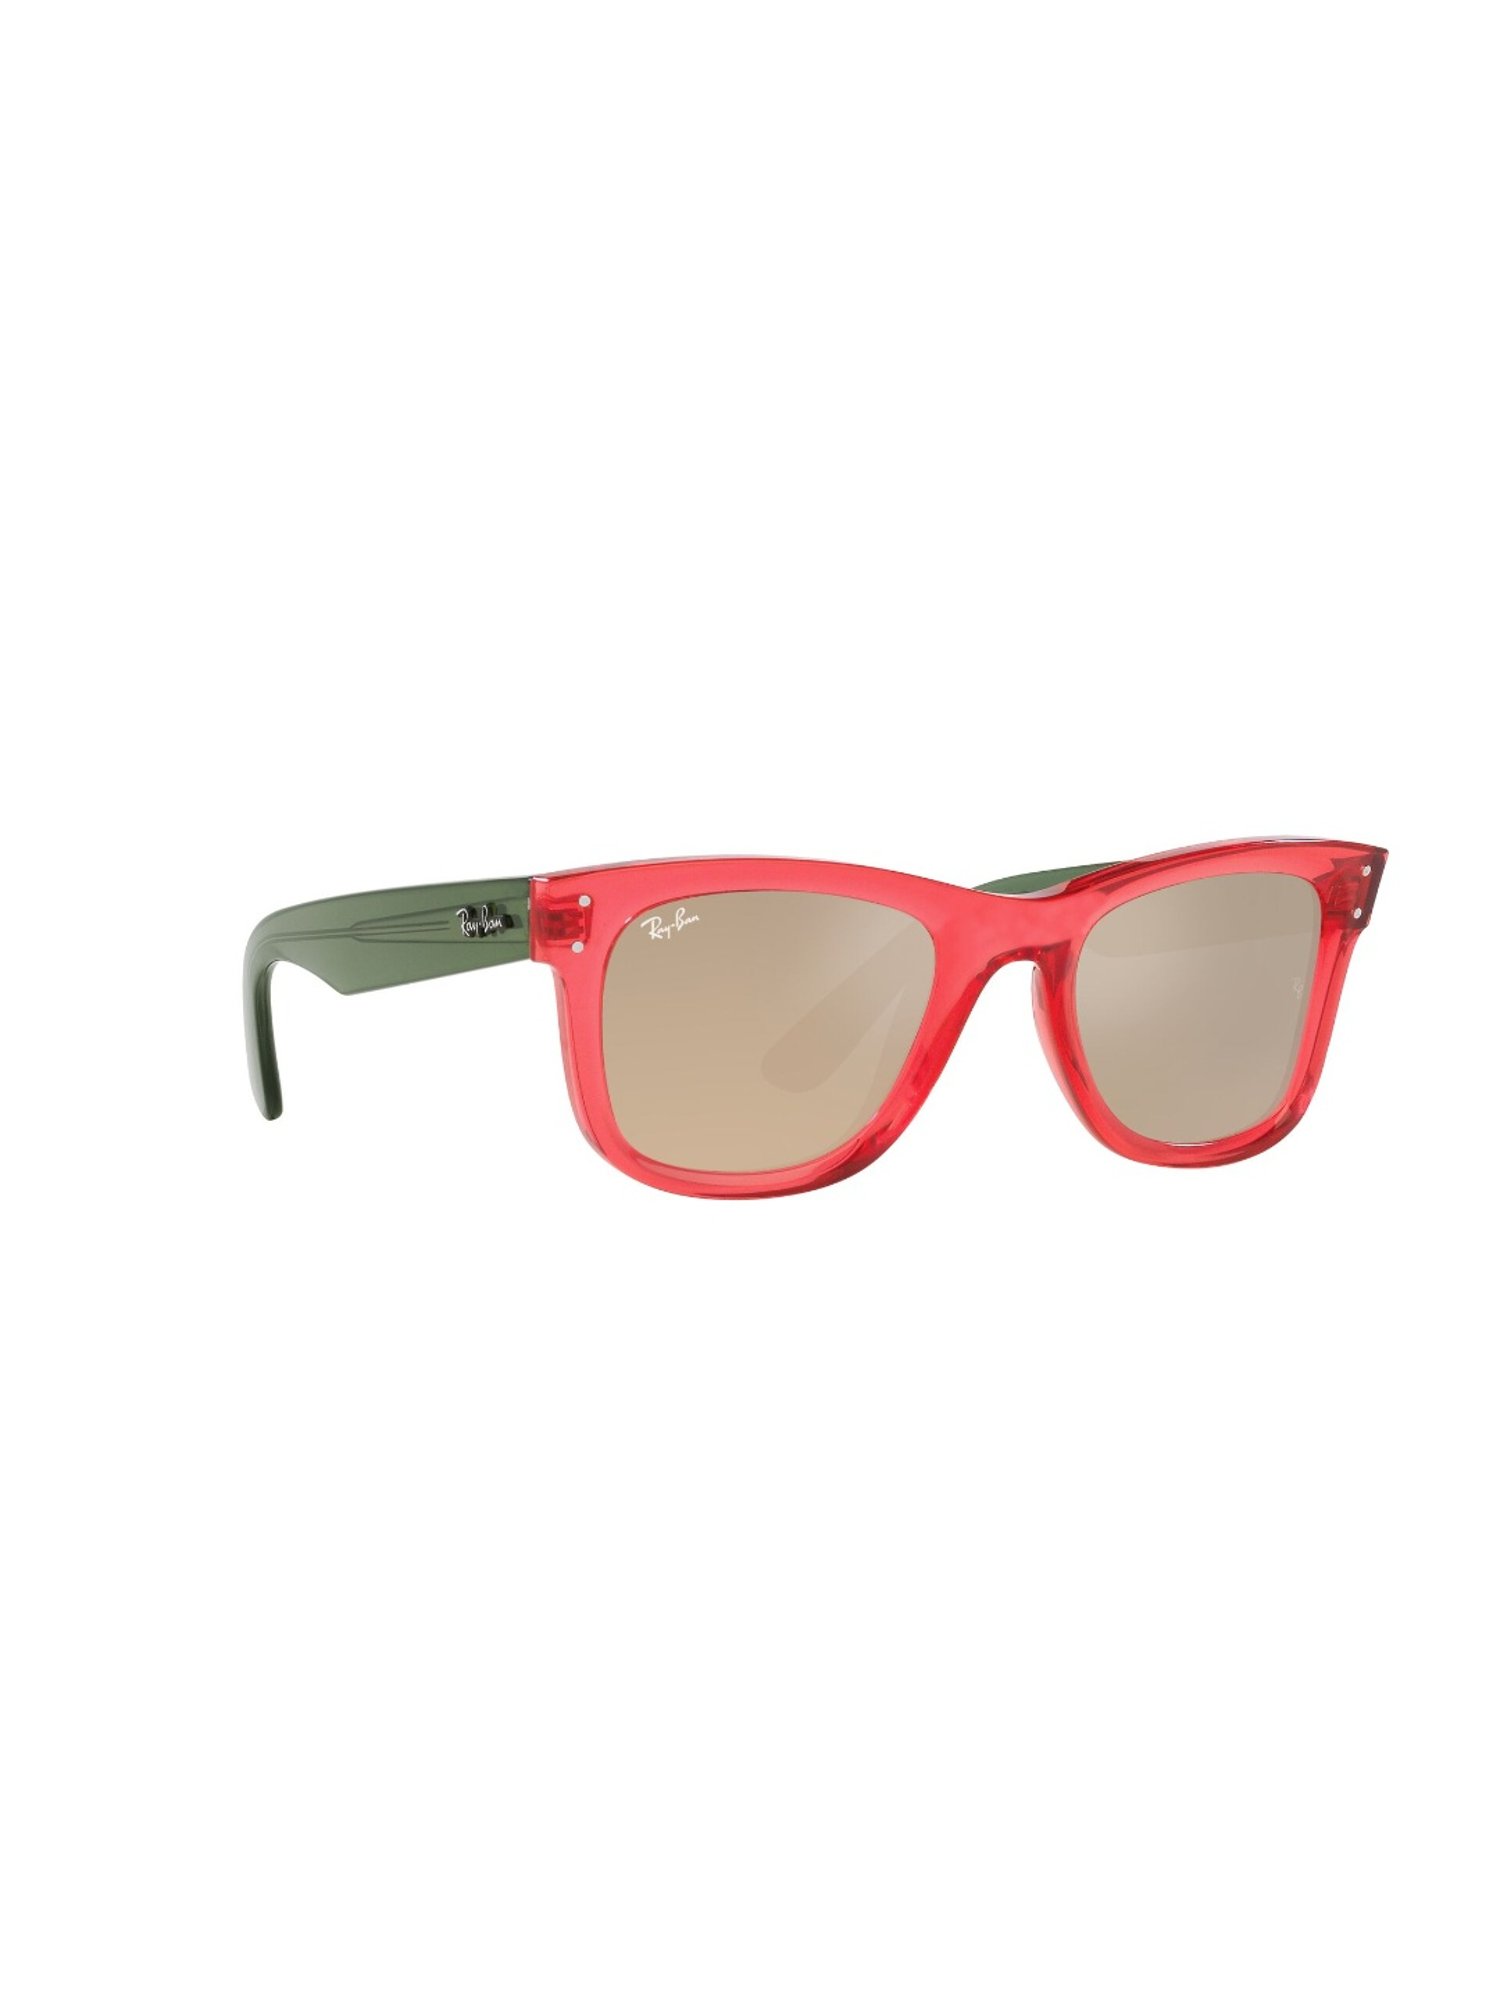 MEGA WAYFARER Sunglasses in Transparent Pink and Red - RB0840S | Ray-Ban® US